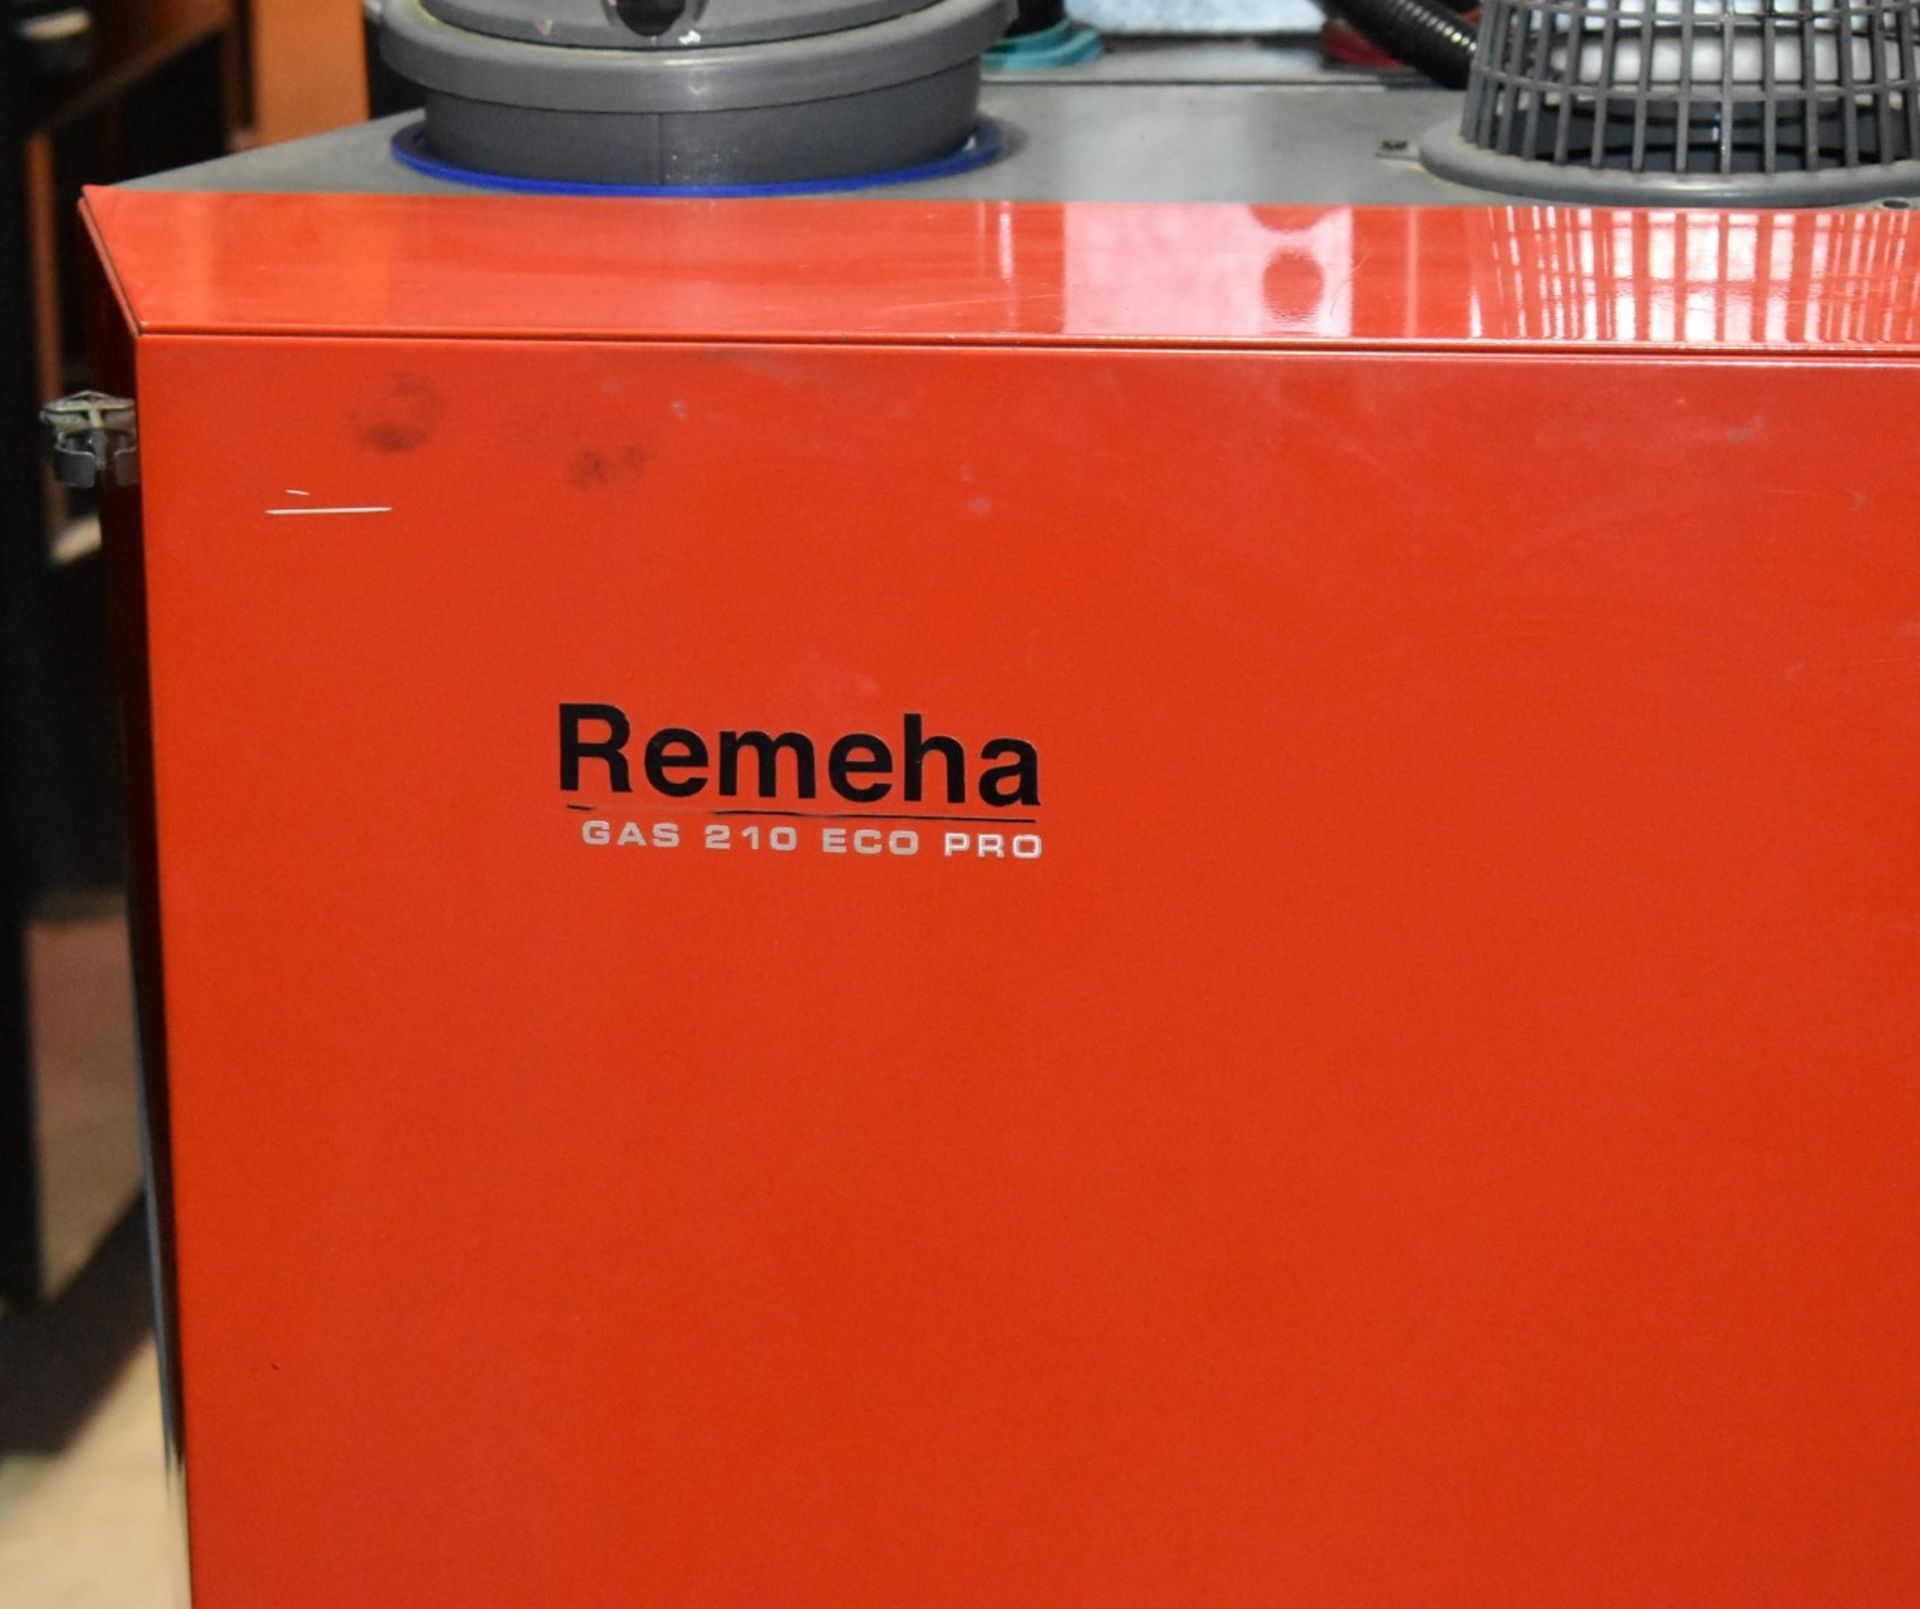 1 x Brohag Remeha Gas 210 Eco Pro Floor Standing Commercial Boiler - Ref: WH2-140 H7B - CL711 - - Image 9 of 10